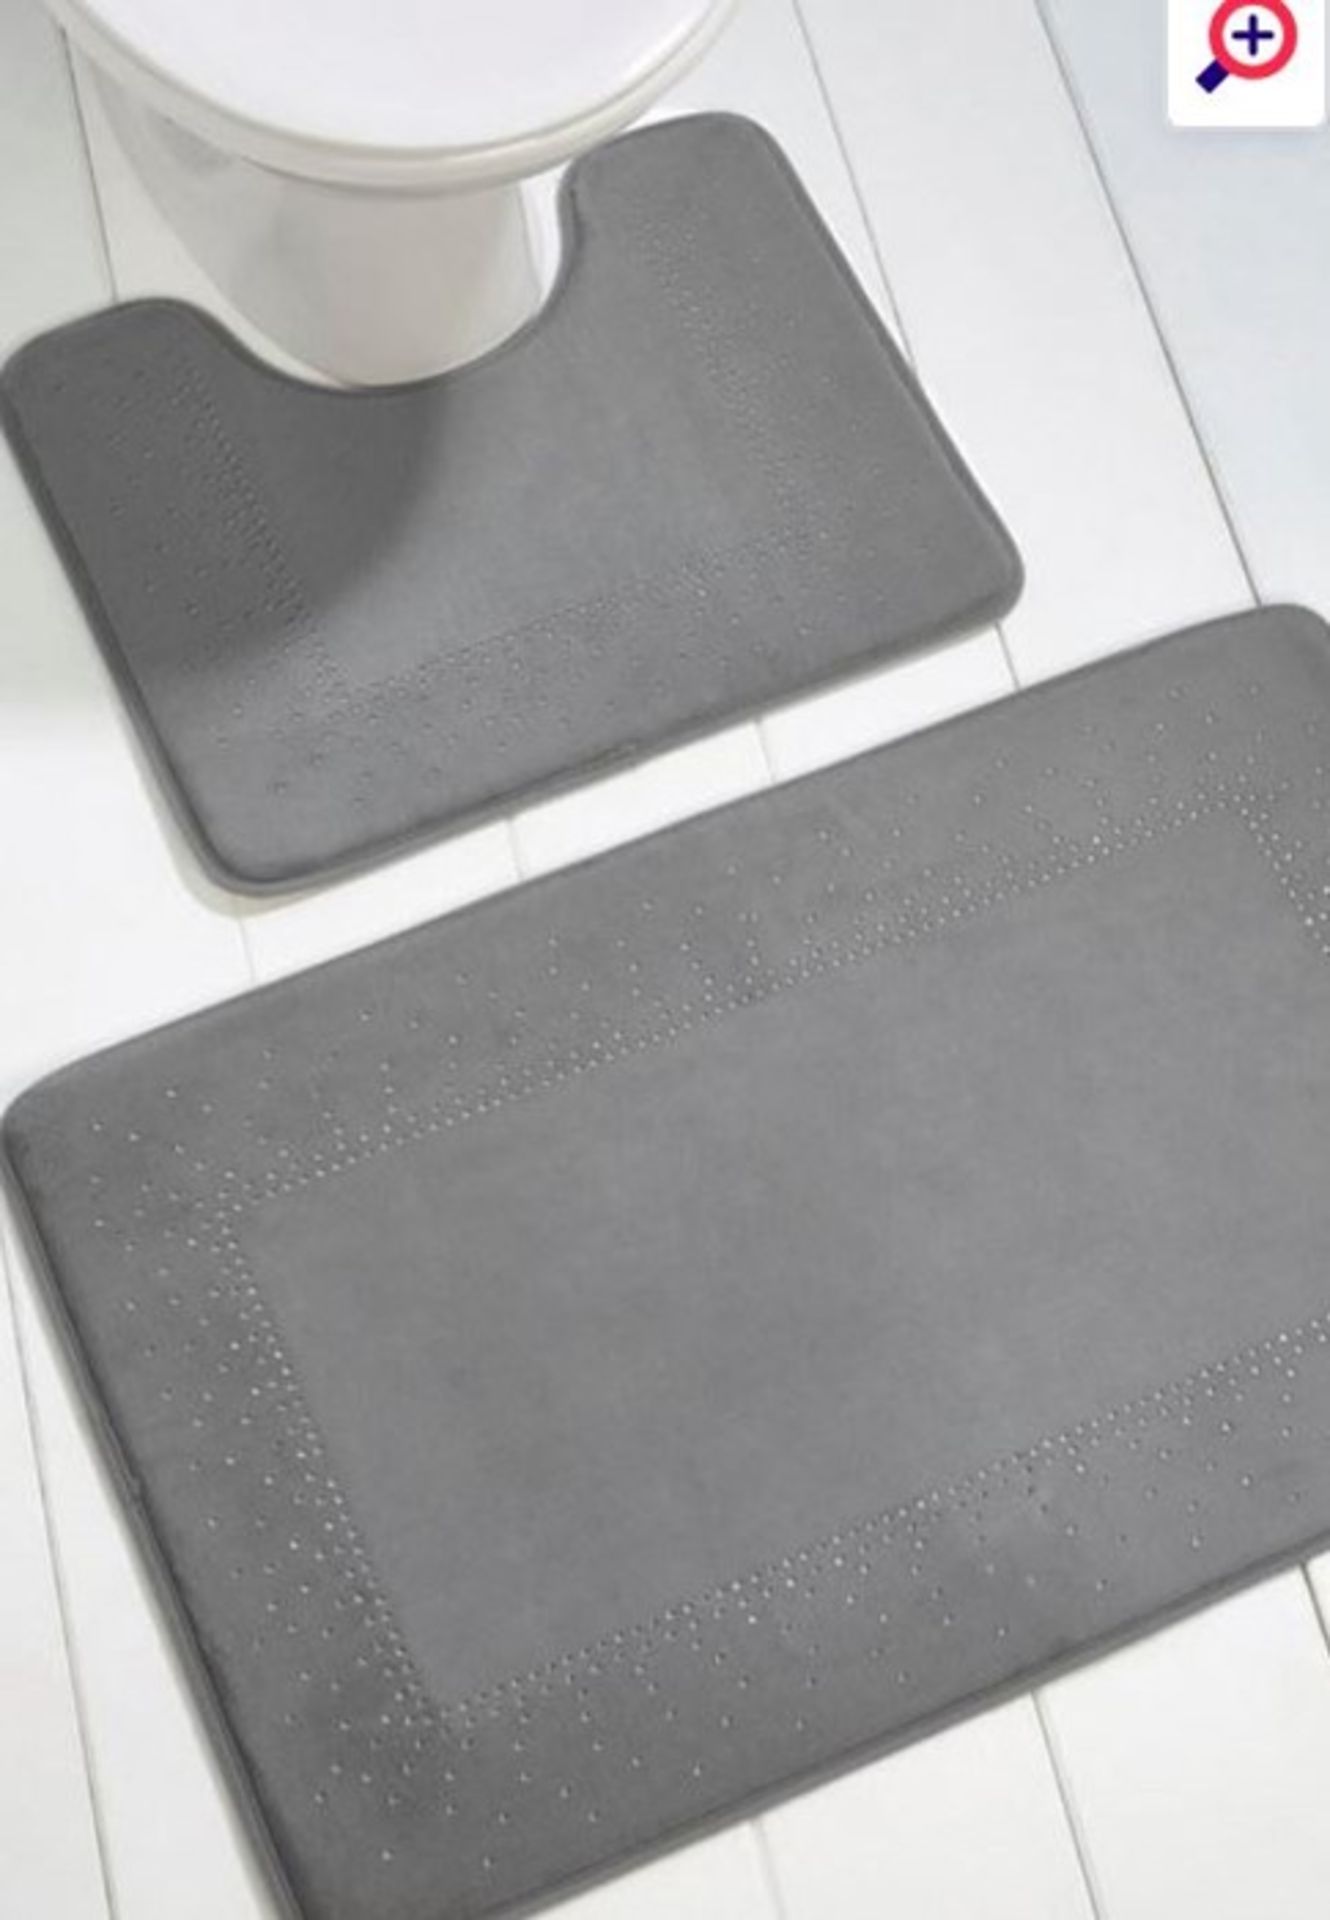 1 AS NEW BAGGED SPARKLE 2 PIECE MEMORY FOAM BATH SET IN GREY / RRP £12.99 (PUBLIC VIEWING - Image 2 of 2